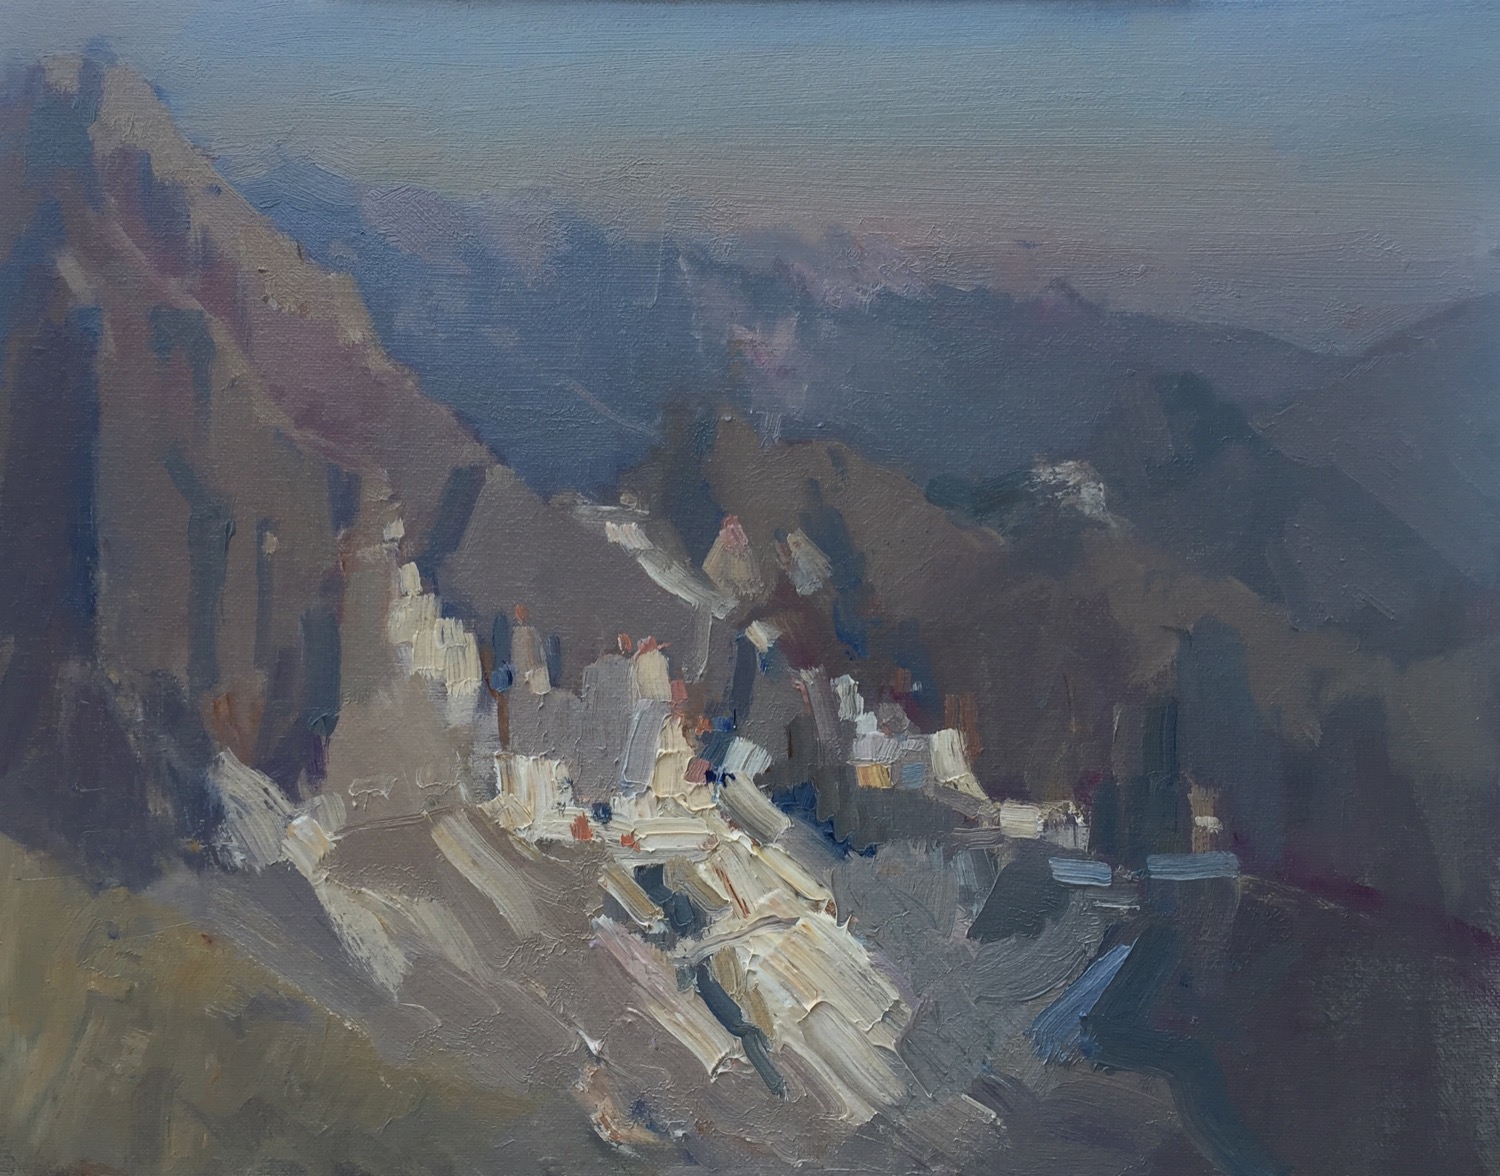 landscape oil painting, Carrara Marble Quarries, Italy, by Barry John Raybould
